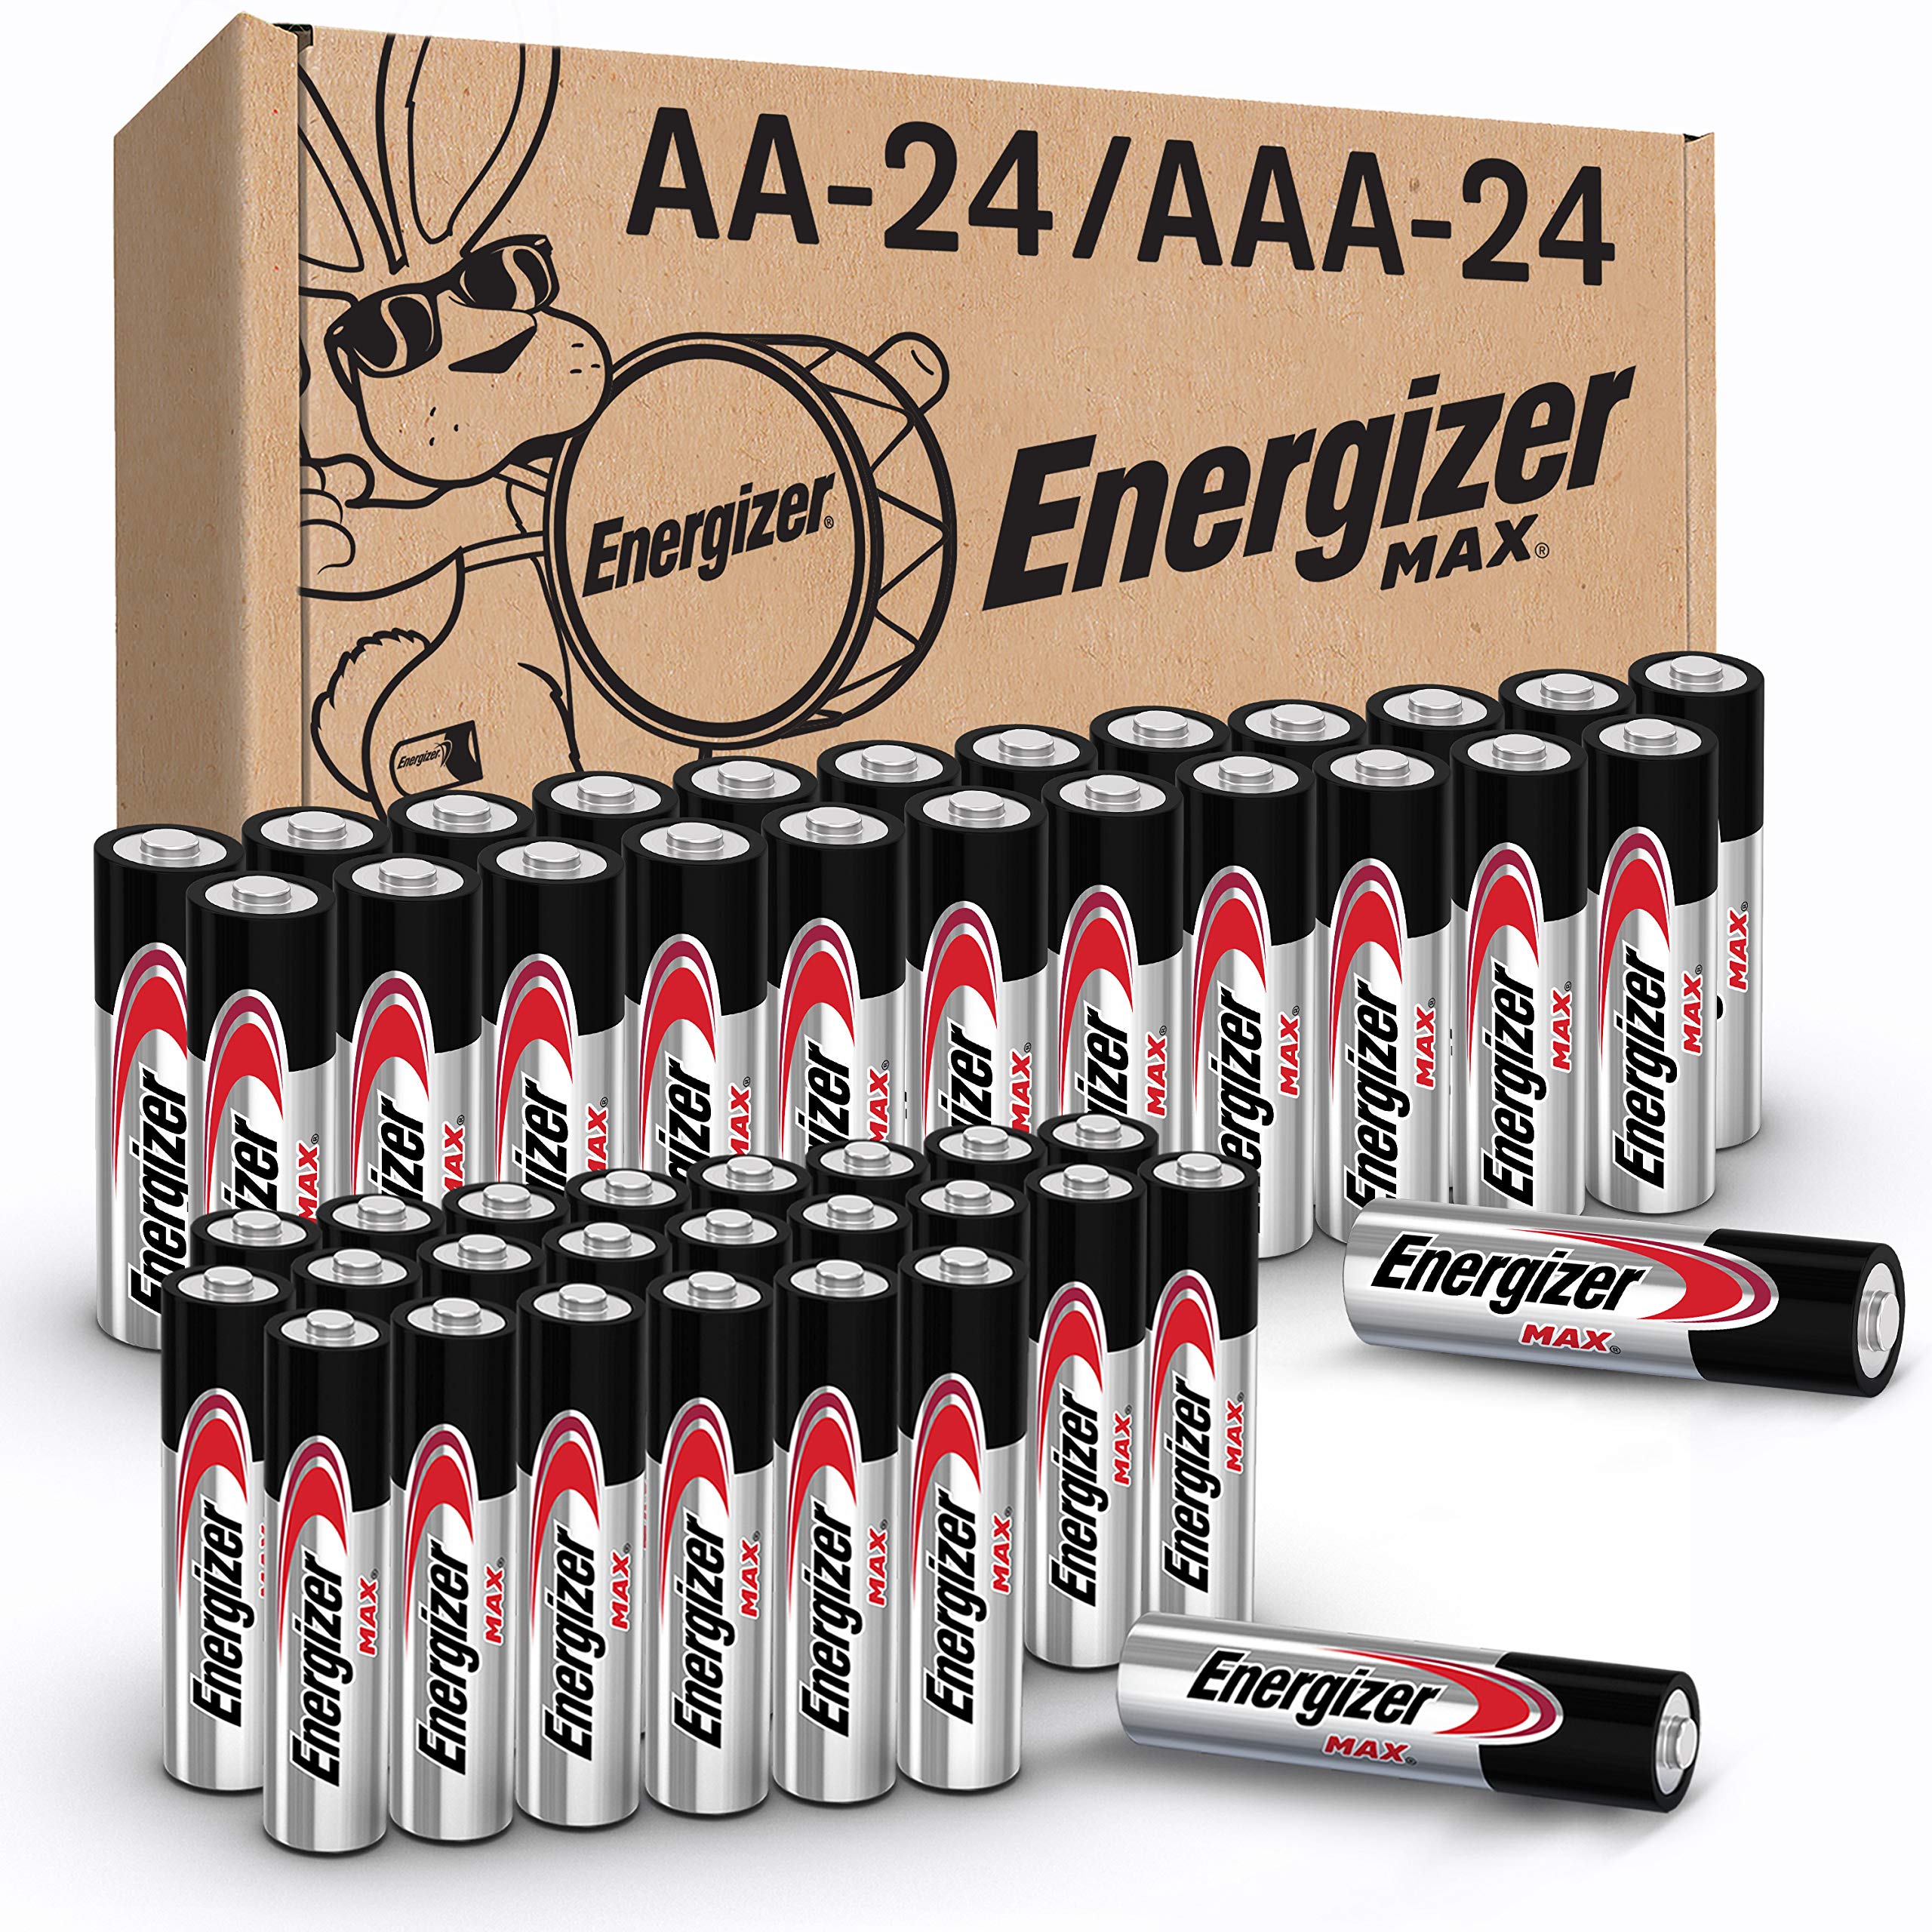 Energizer MAX AA Batteries, AAA Batteries Combo Pack